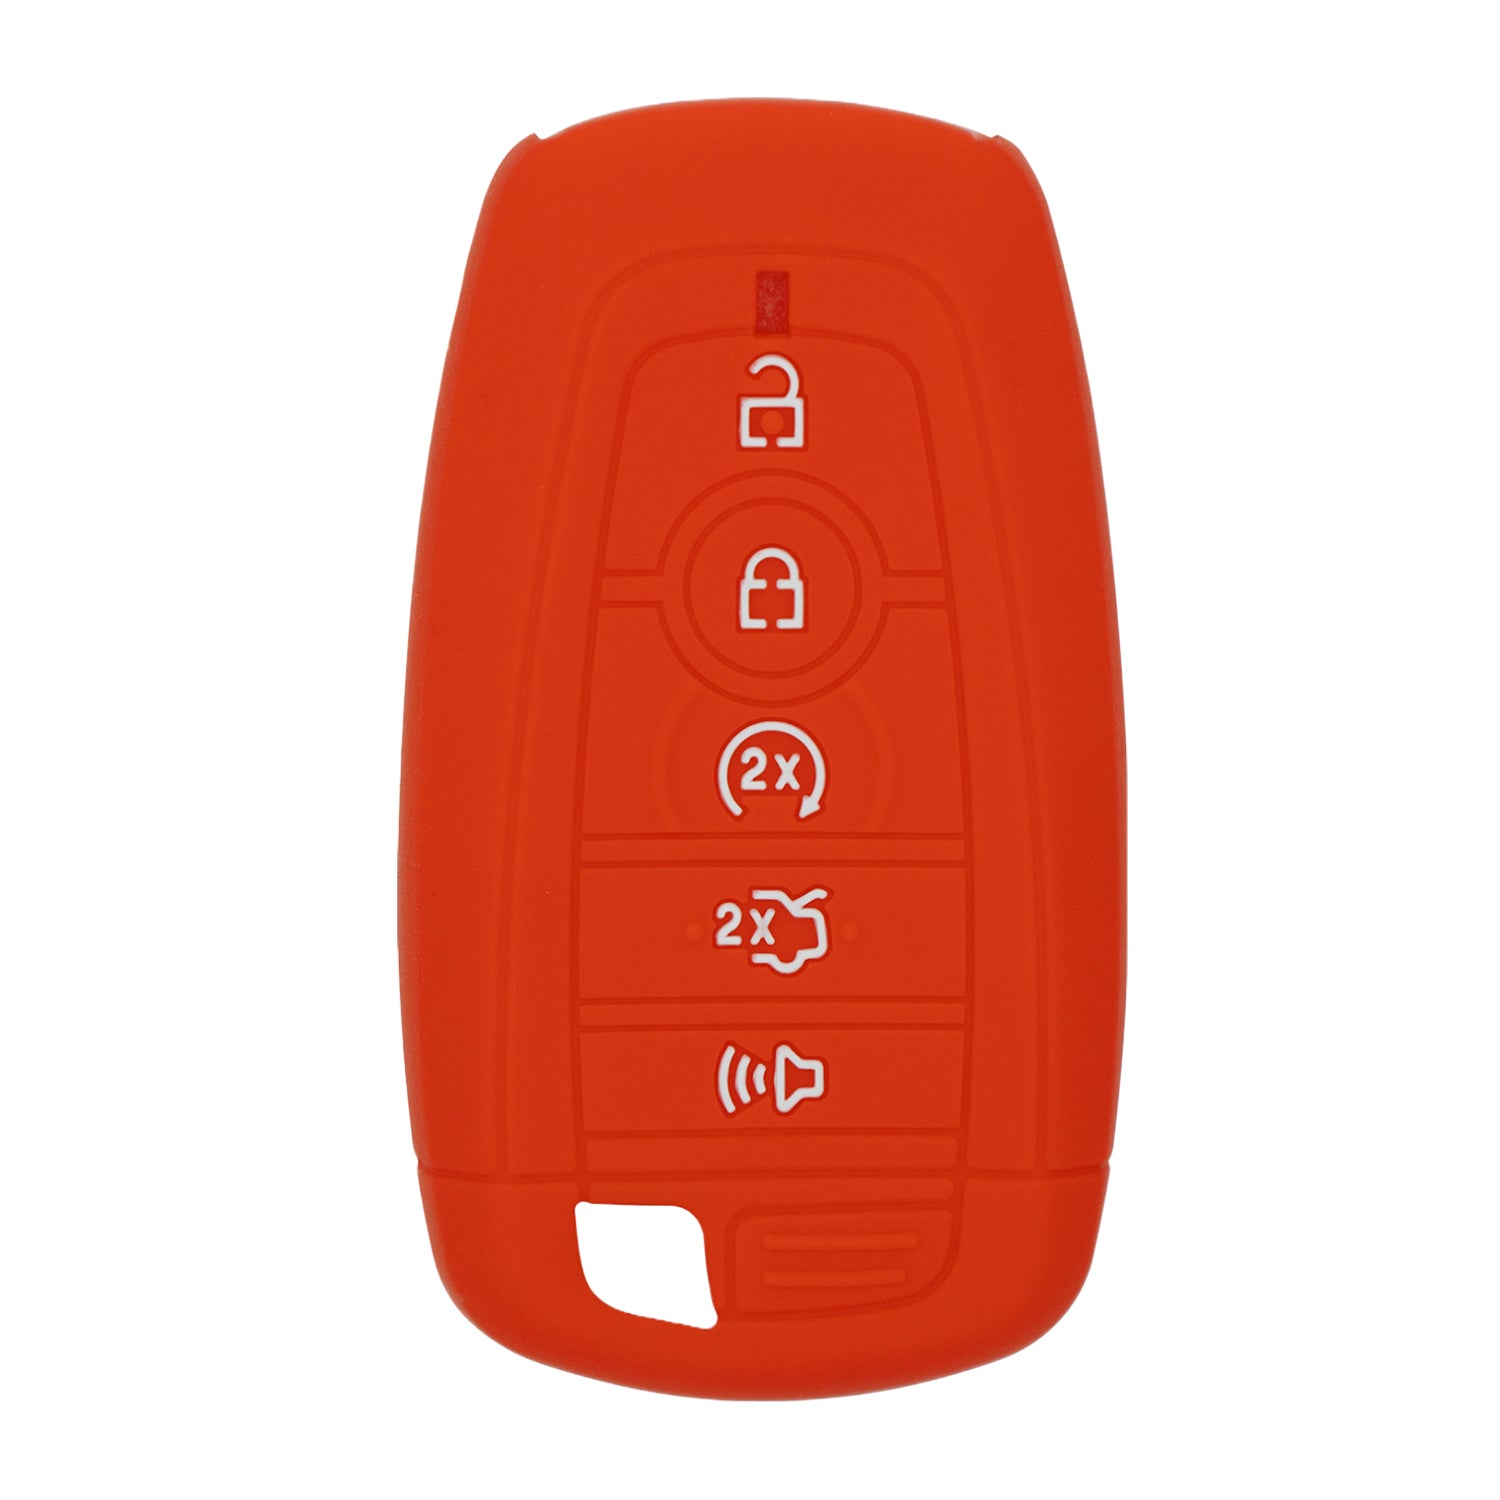 Silicone Case for Smart Key Remote Keyless Entry for Ford Fusion Explorer Edge Mustang Expedition M3N-A2C93142600 164-R8149 164R8149 R8149 (Red)